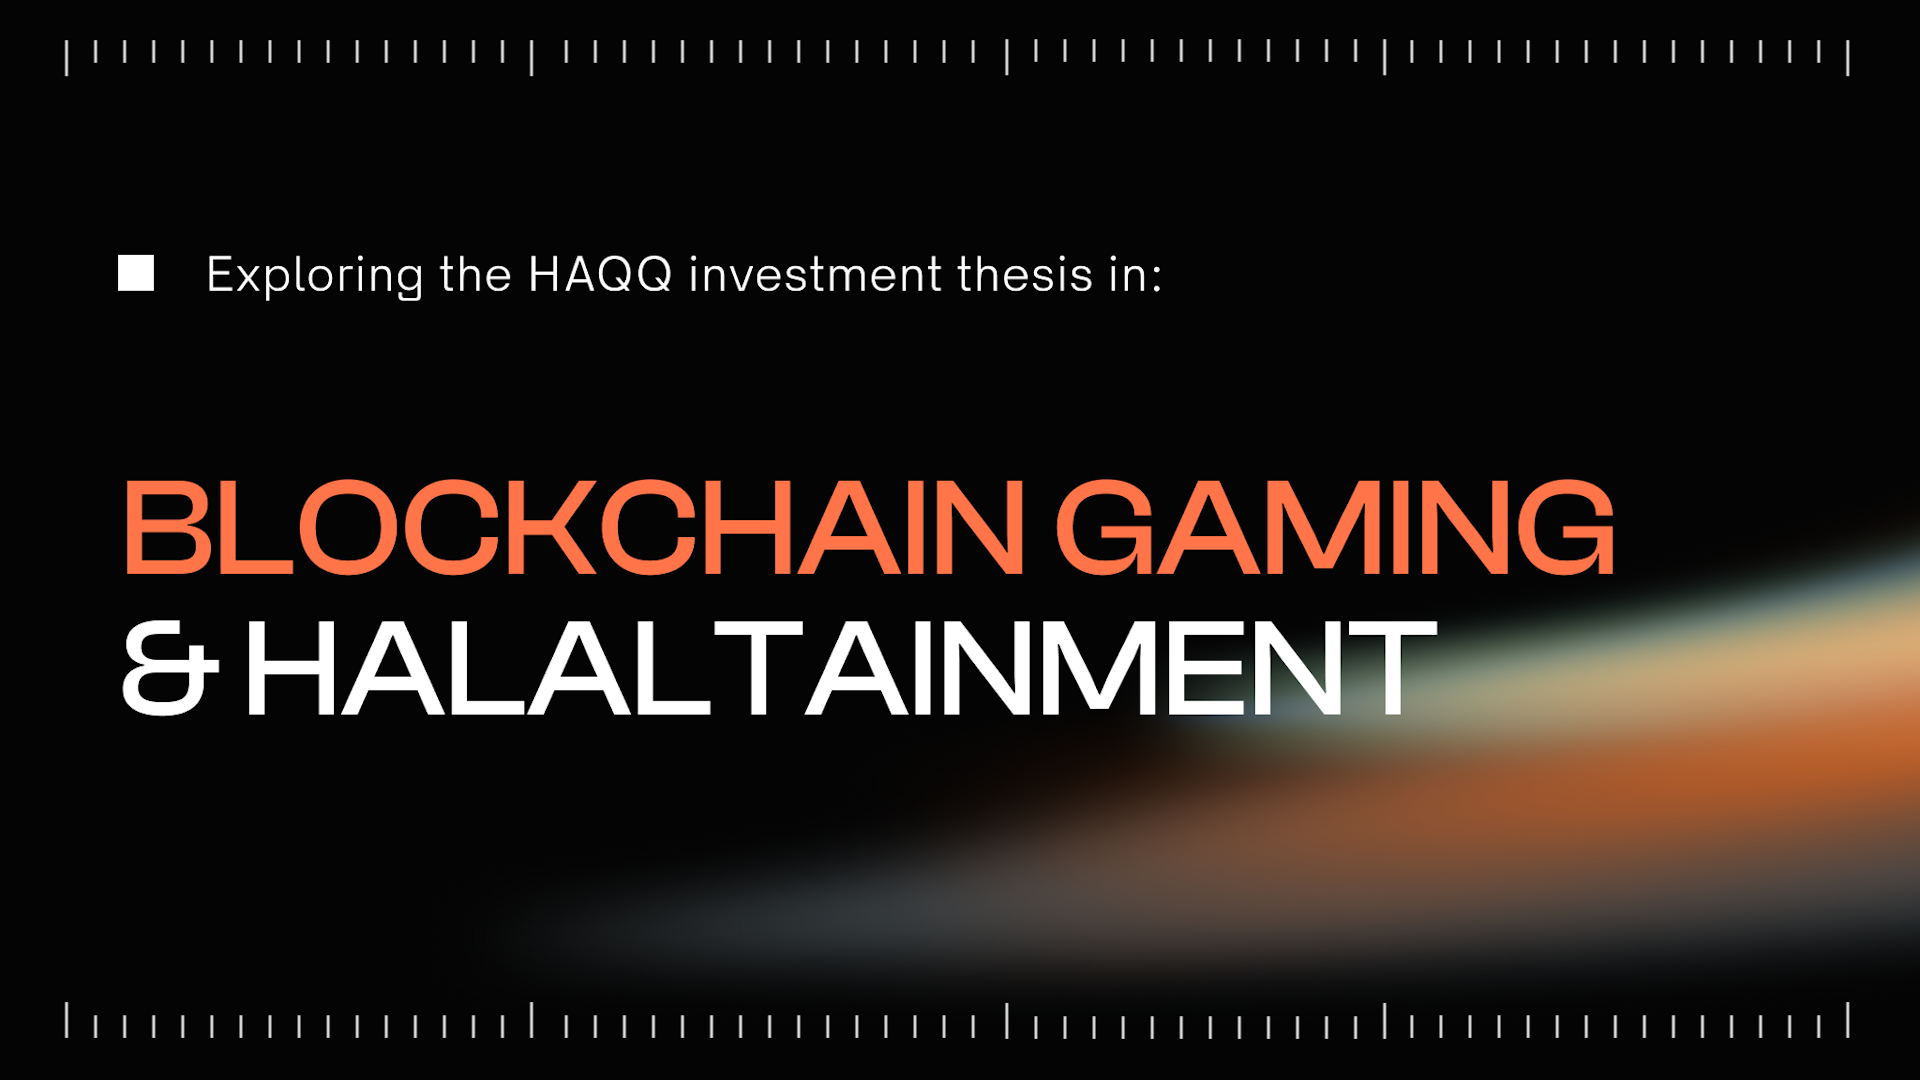 Exploring the HAQQ investment thesis in blockchain gaming and halaltainment